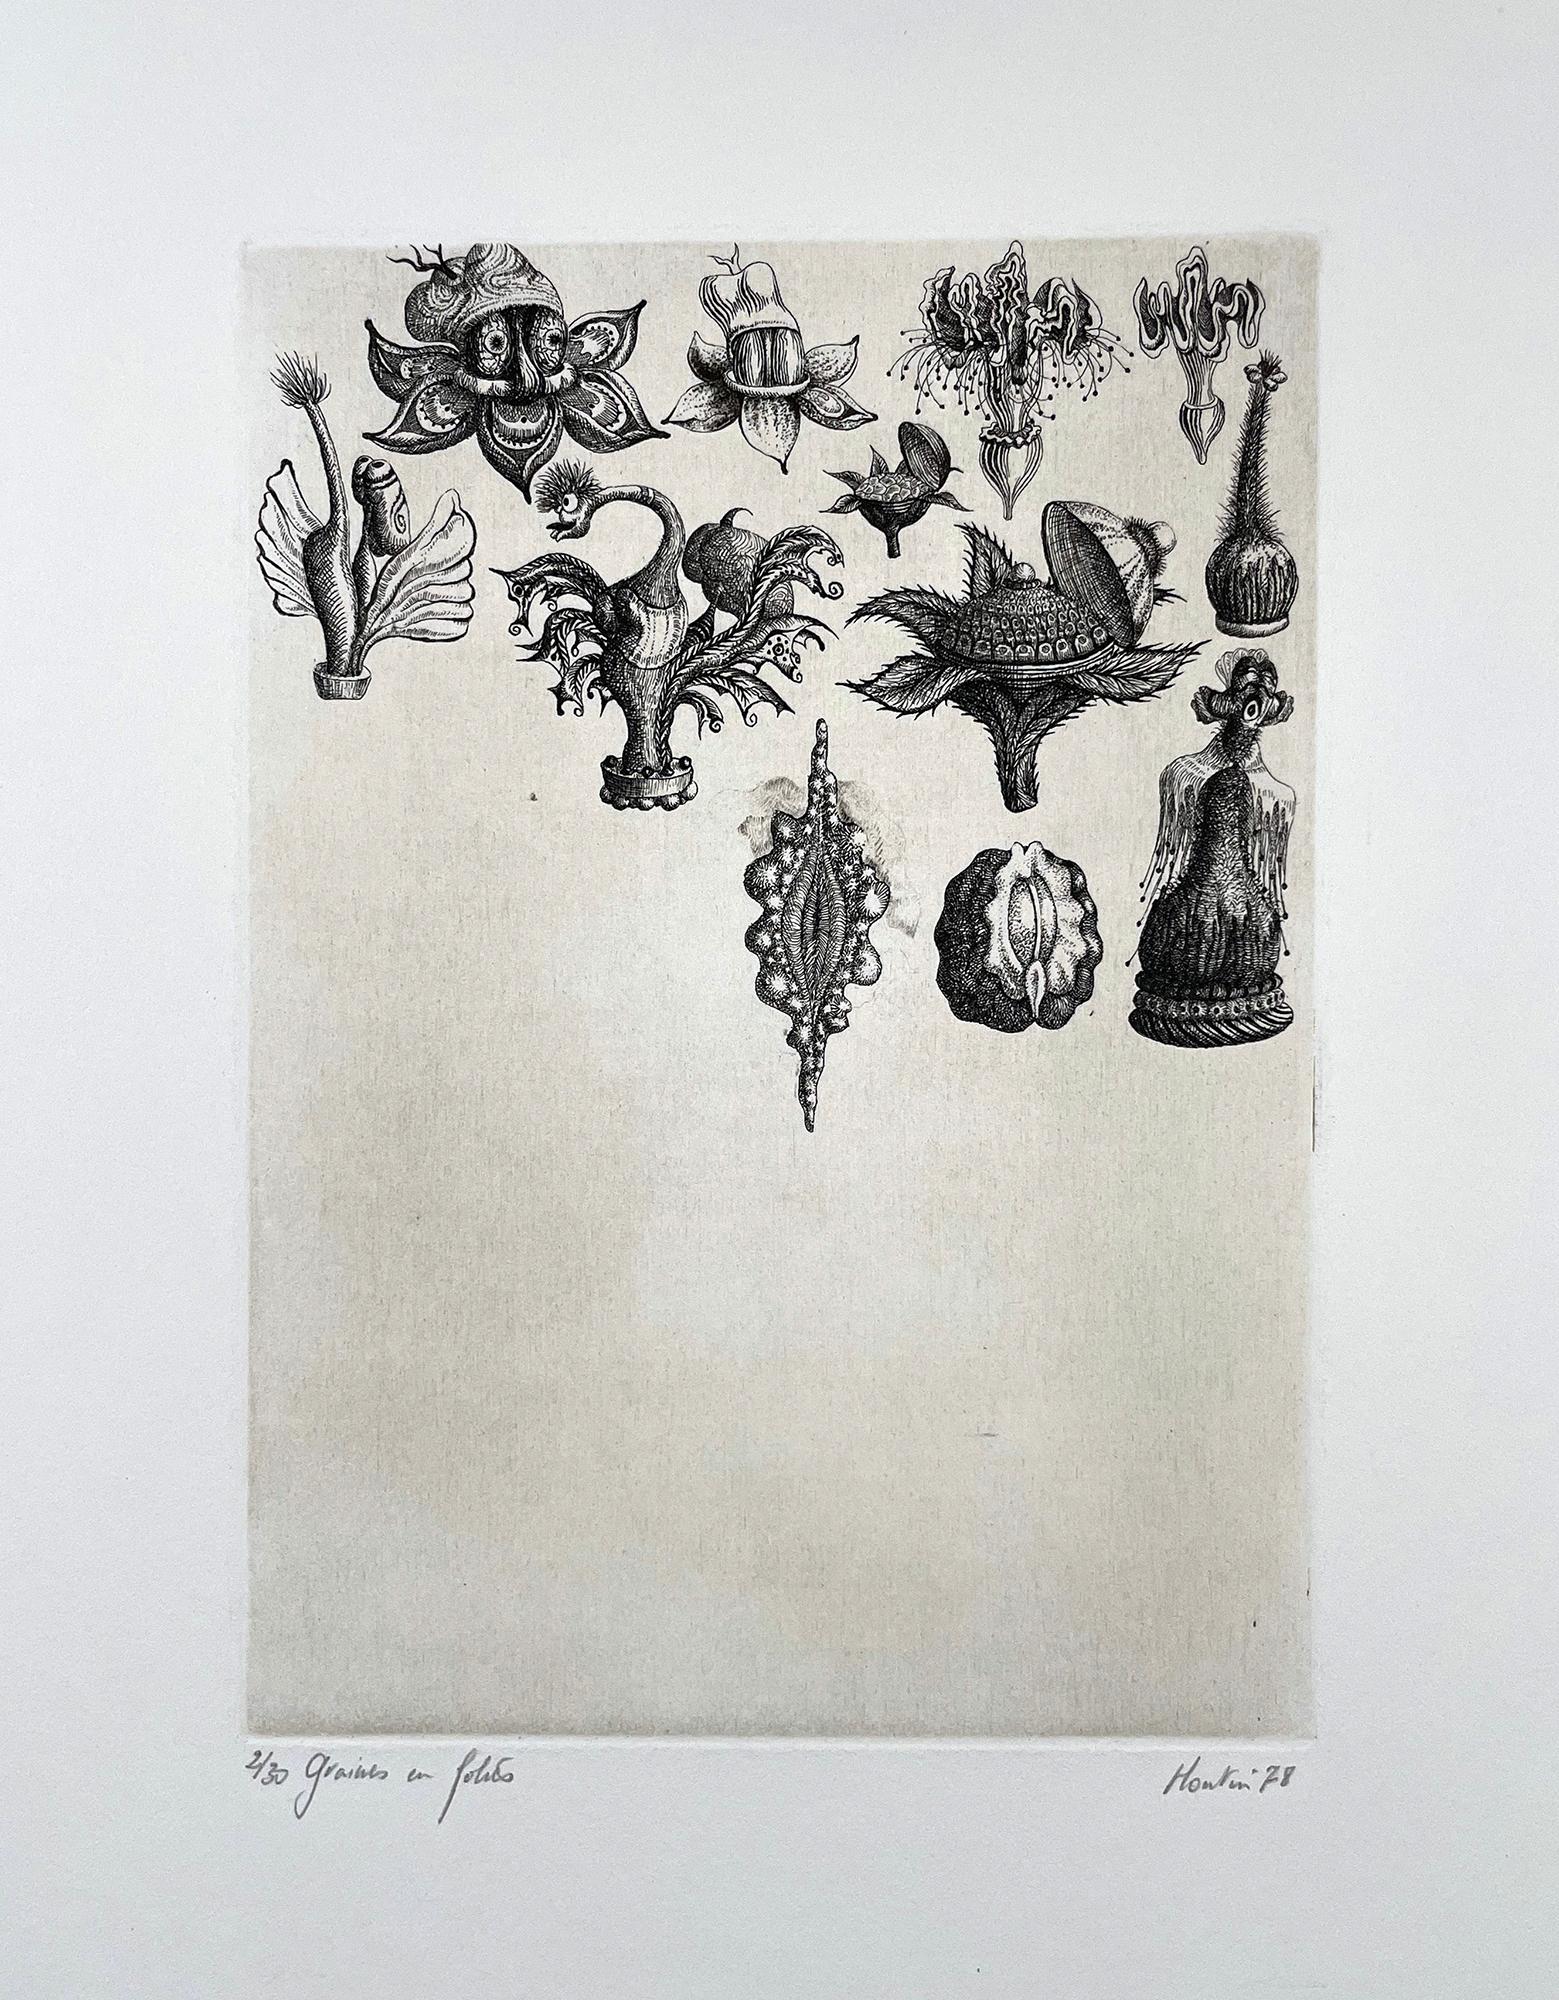 Signed, titled and numbered by the artist, edition of 30.  Imaginary topiary and garden scenes, with incredibly fine line work in the etching in this image of a suspended garden. Others in this series are available.

François Houtin was born in